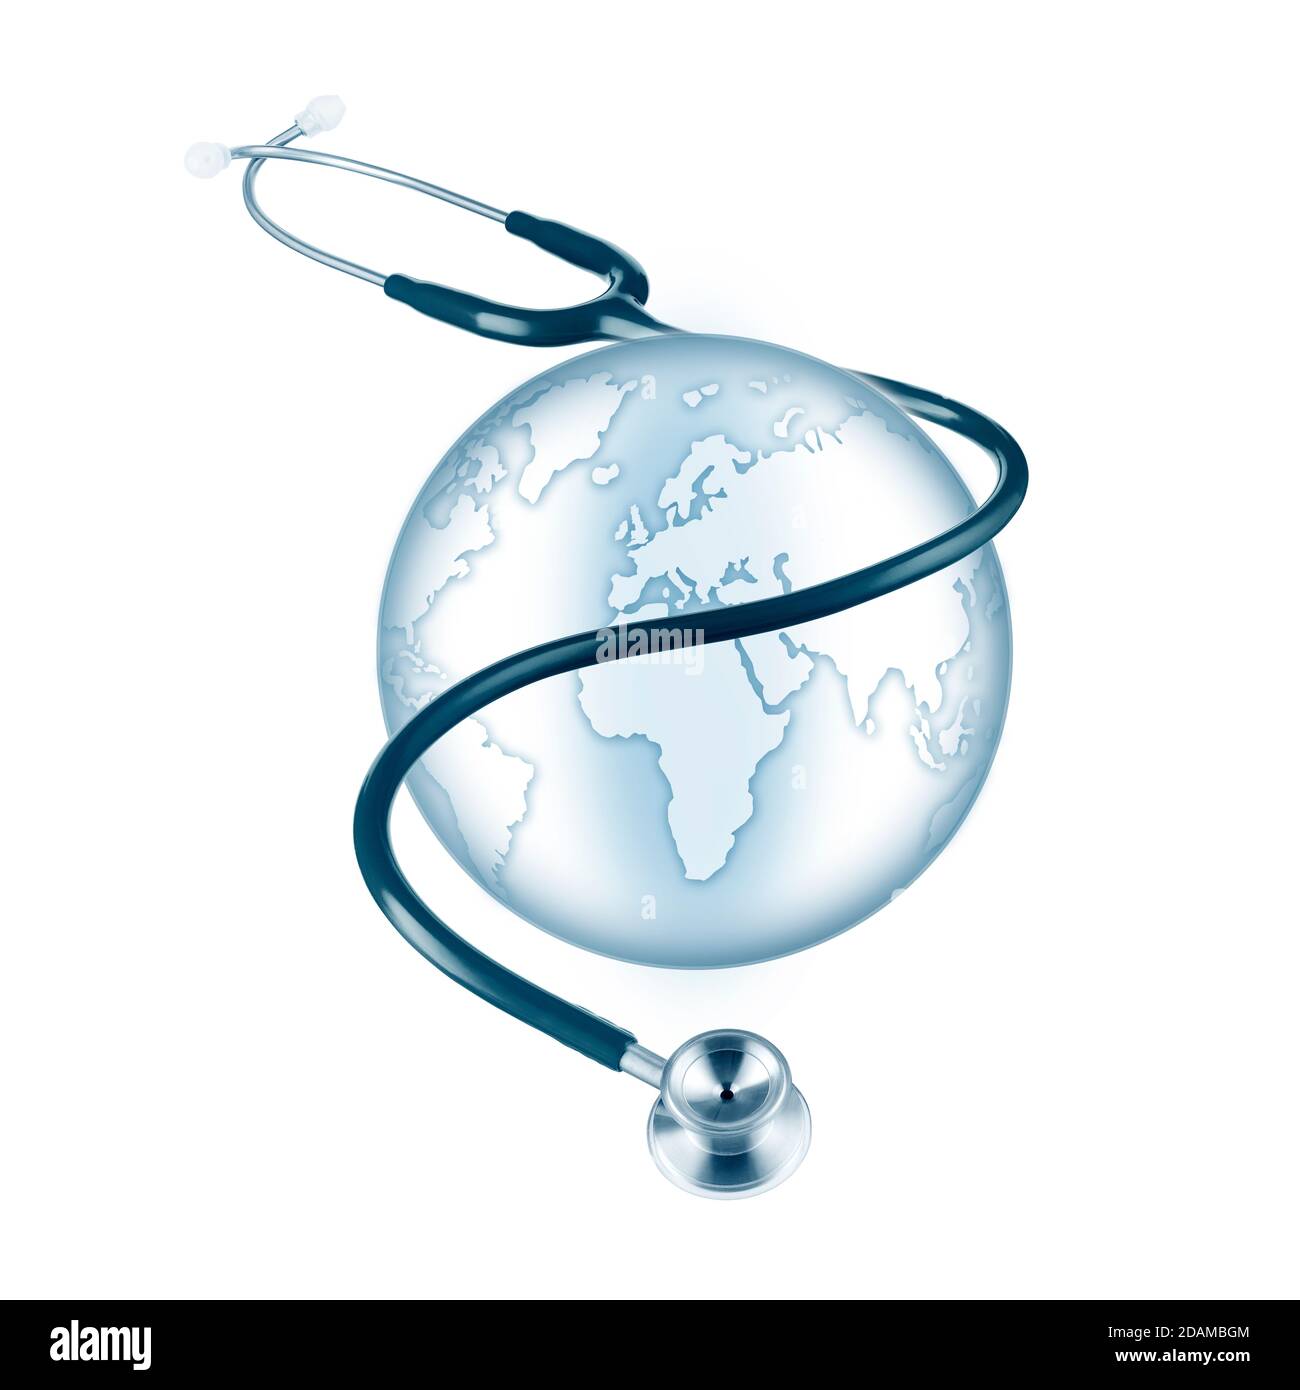 Earth wrapped with stethoscope, illustration. Stock Photo